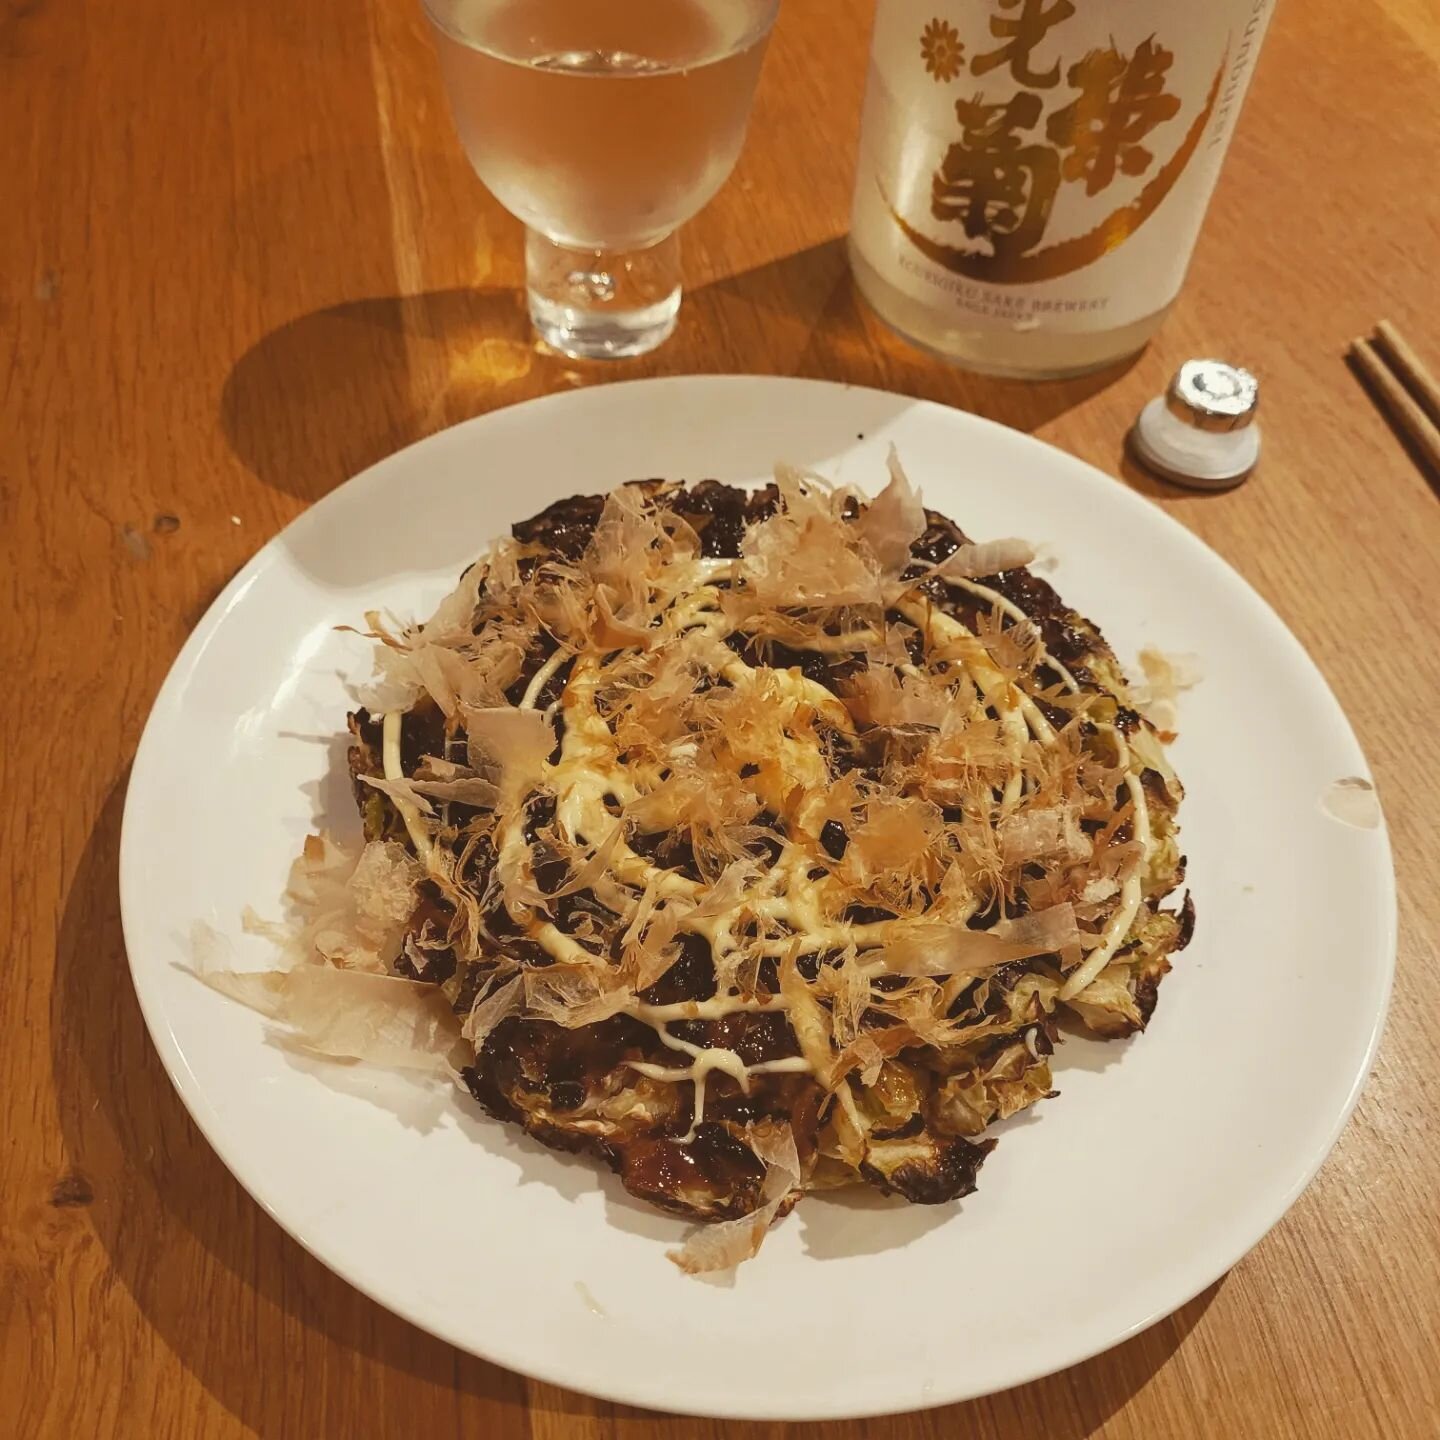 Couldn't find anyone who could make #okonomiyaki in Ireland so I had to try and perfect it myself. Getting there...

Our Australian friends @blackmarketsake have a lovely note on the brewery @koueigiku which is accompanying the okonomiyaki in the pho